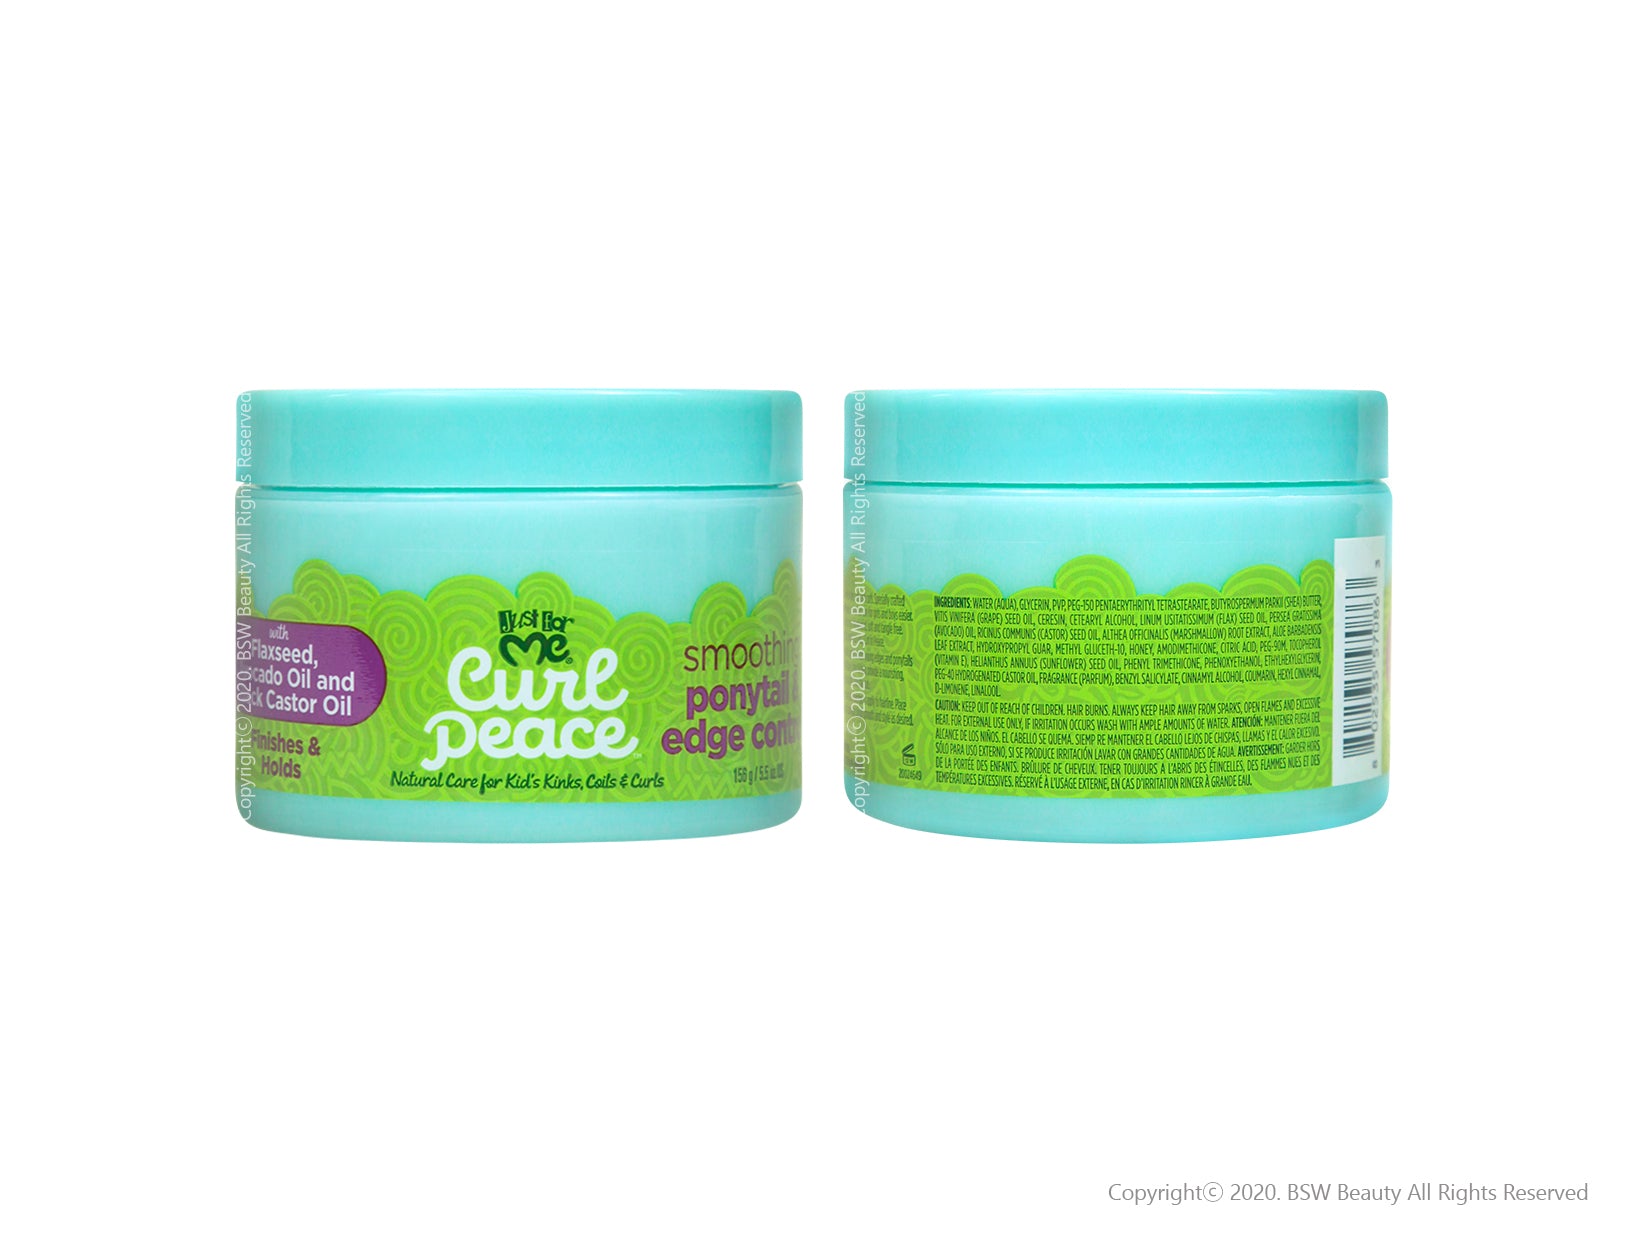  Just For Me Curl Peace Smoothing Ponytail & Edge Control -  Finishes & Holds, Contains Flaxseed, Avocado Oil & Black Castor Oil, 5 oz :  Beauty & Personal Care